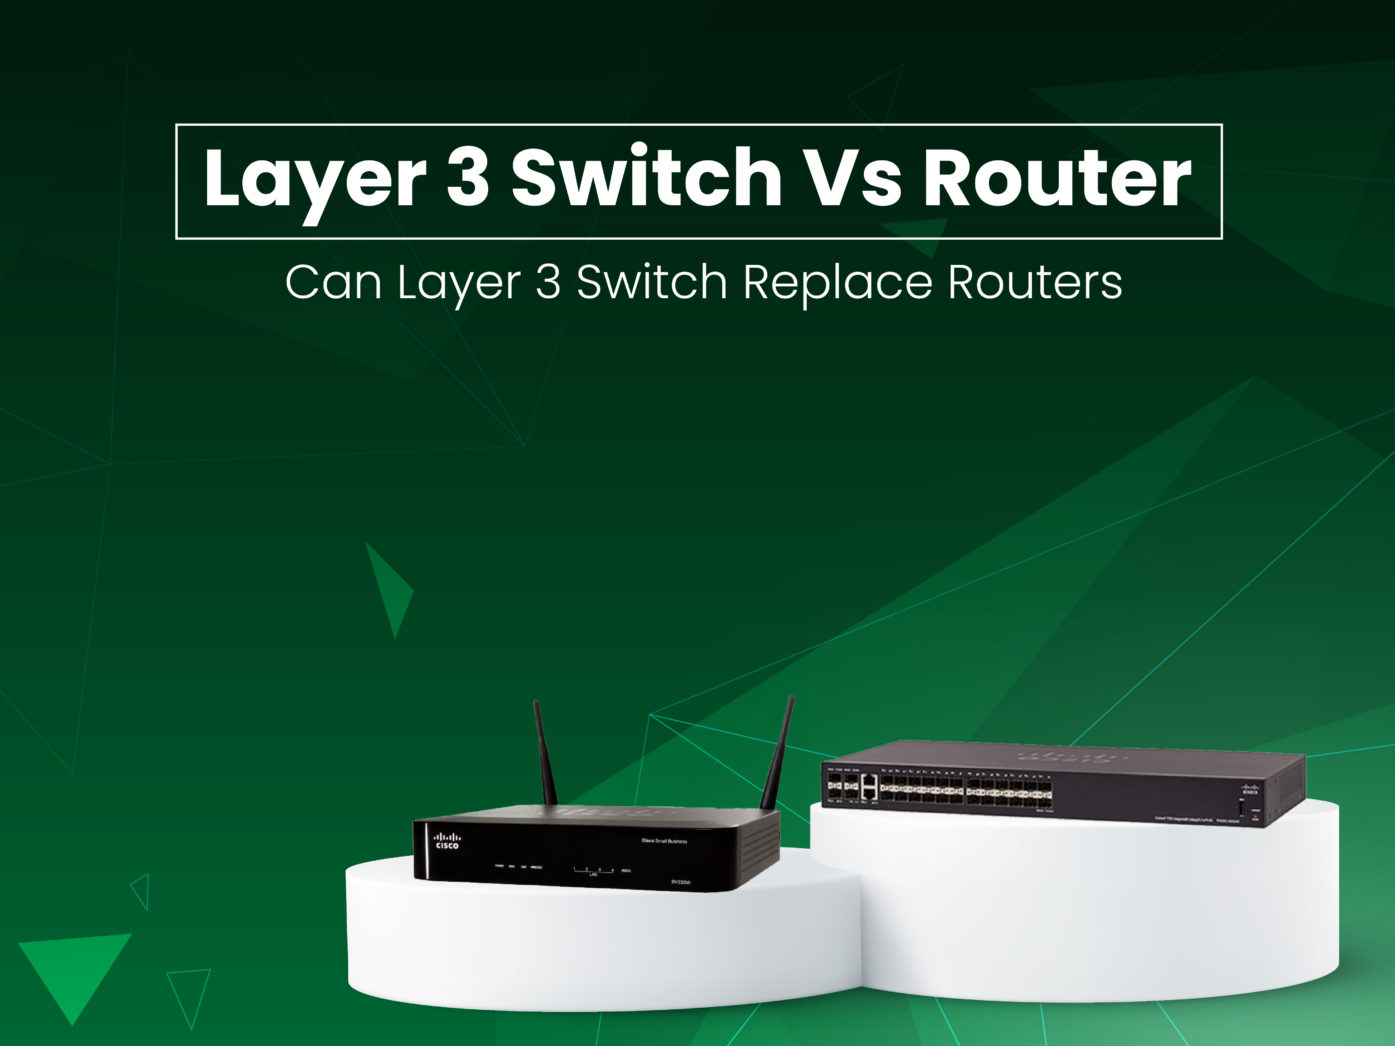 Layer 3 Switch Vs Router Can Layer 3 Switch Replace Routers 01 Gear Net Technologies LLC